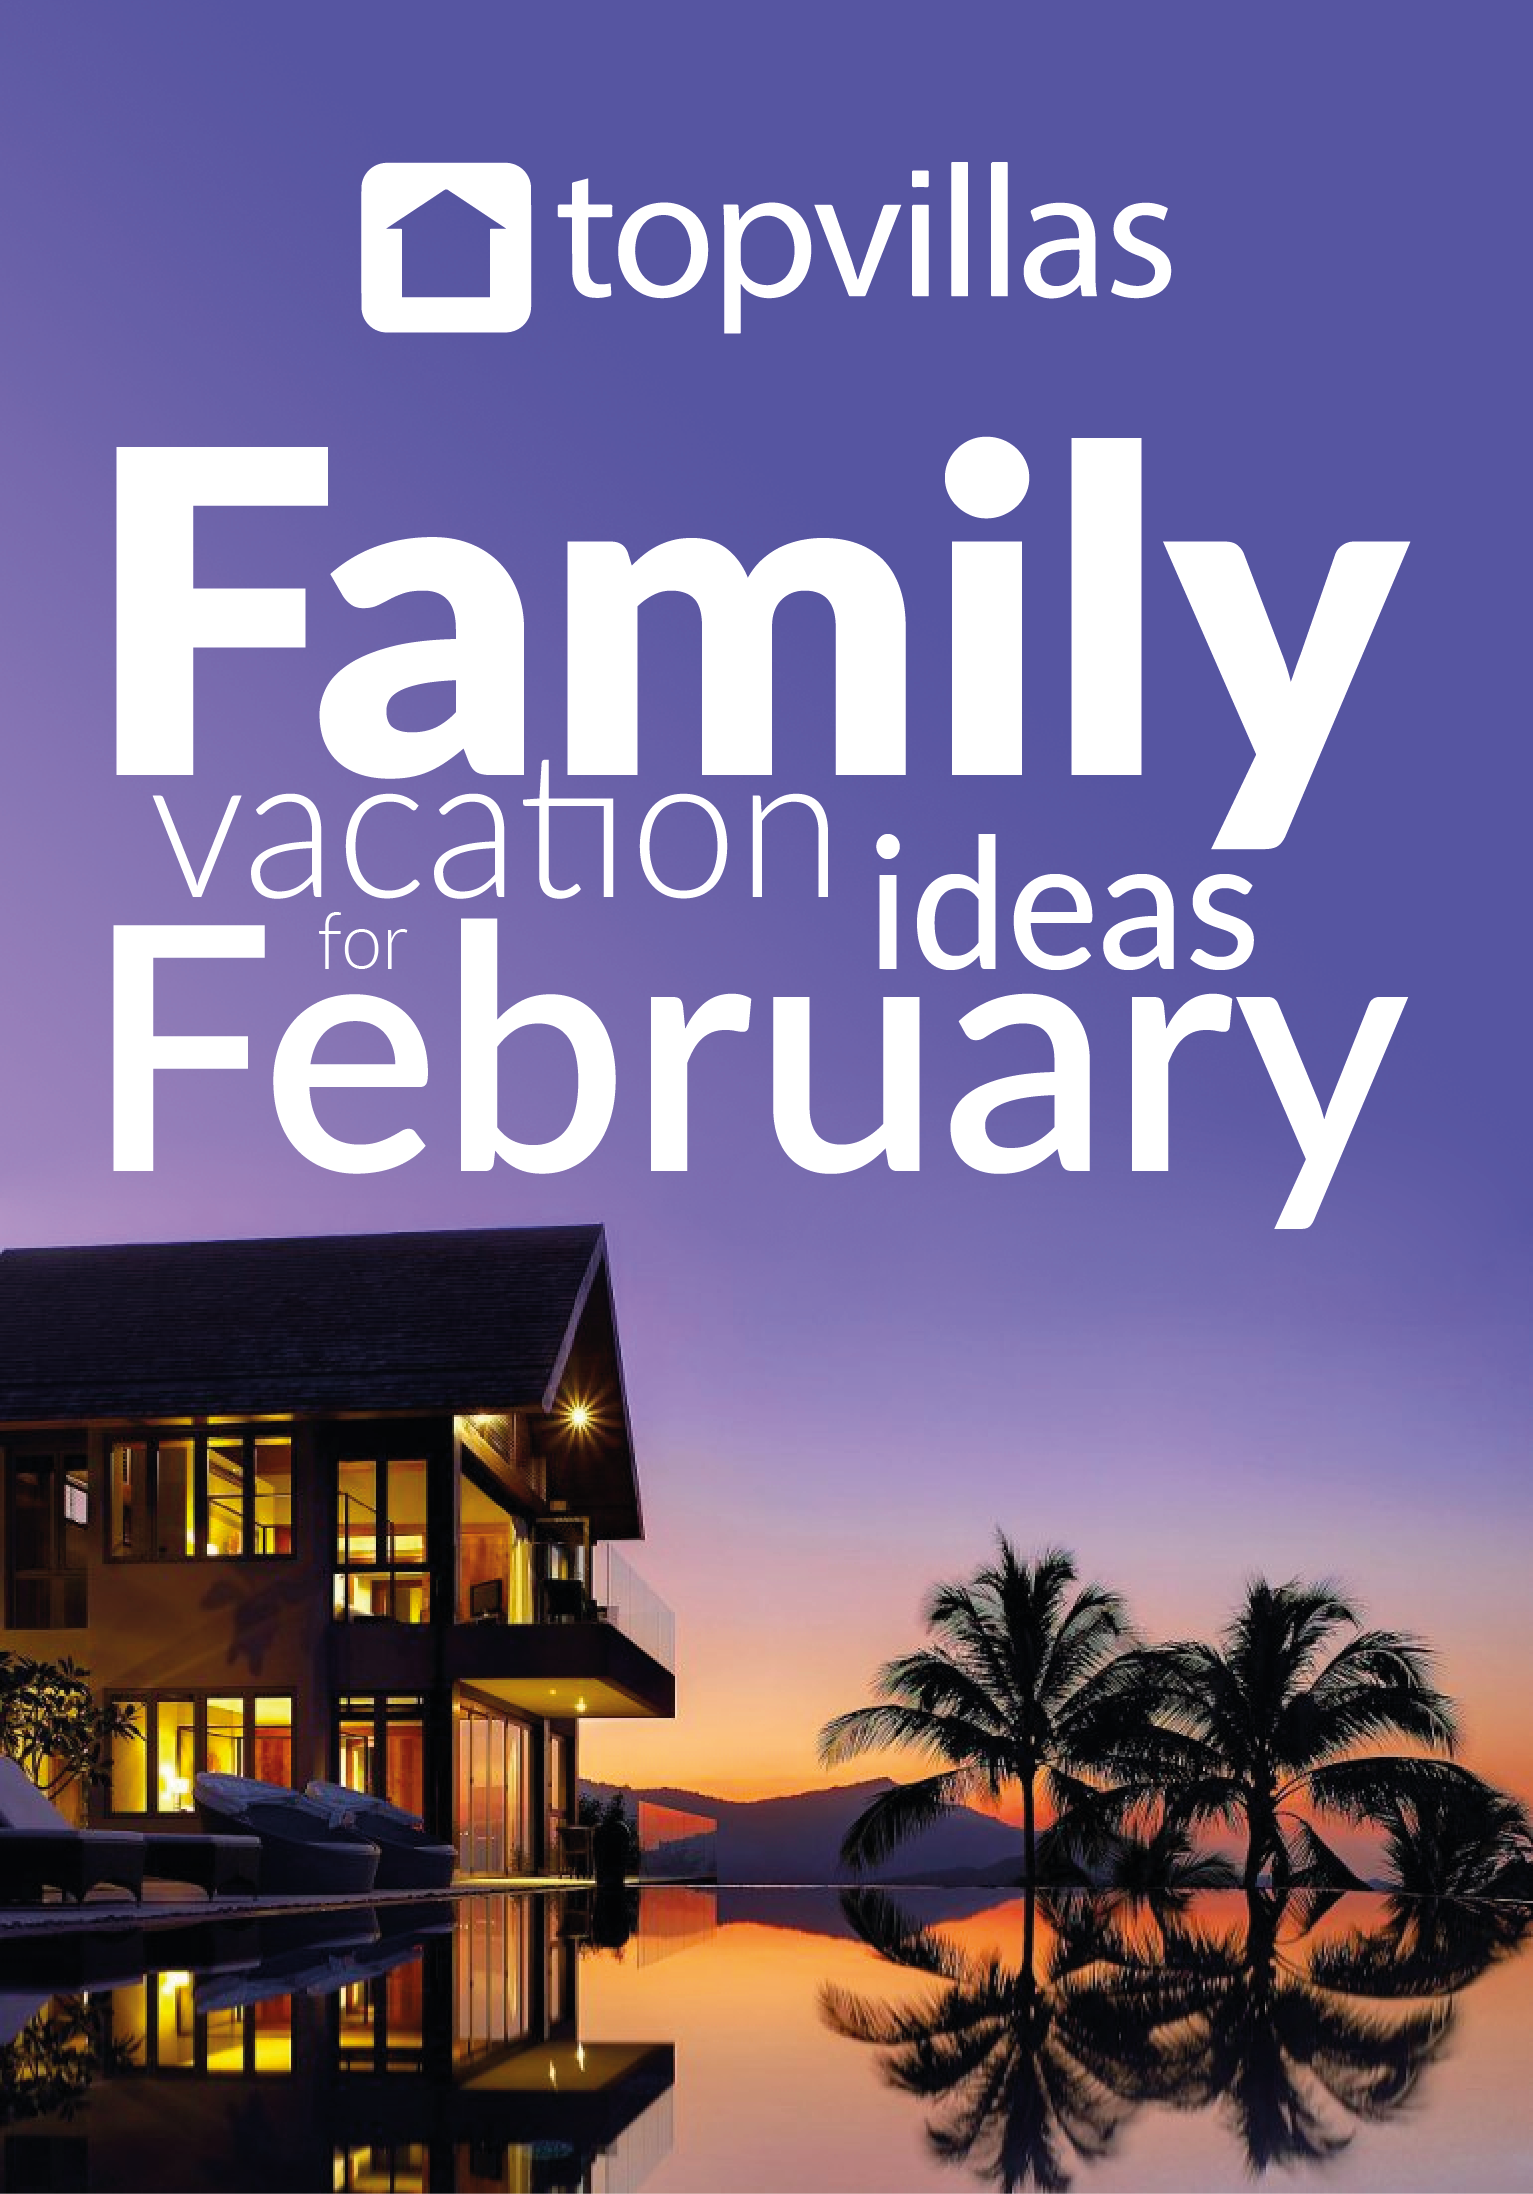 blog_friday_great_places_for_a_family_vacation_in_february01 Top Villas